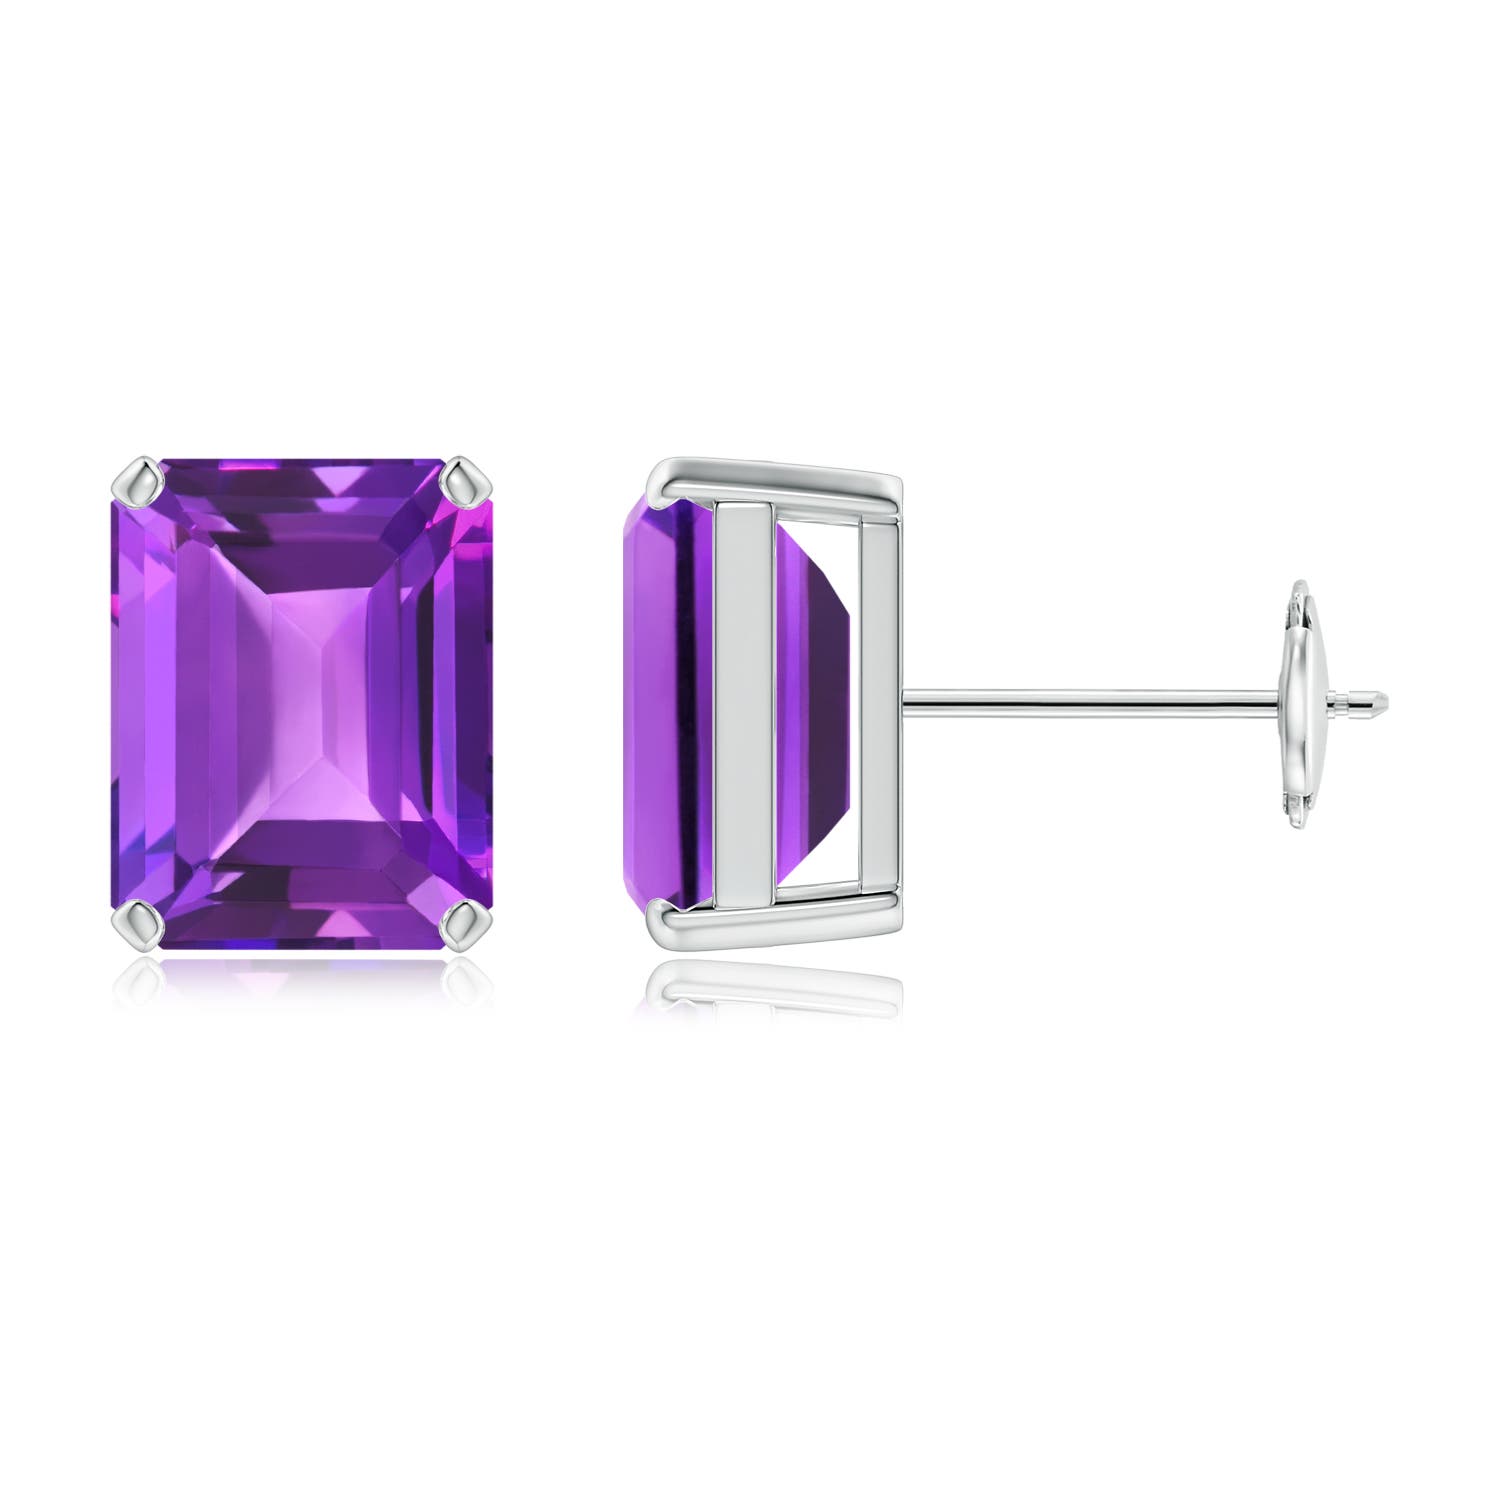 AAA - Amethyst / 4.4 CT / 14 KT White Gold